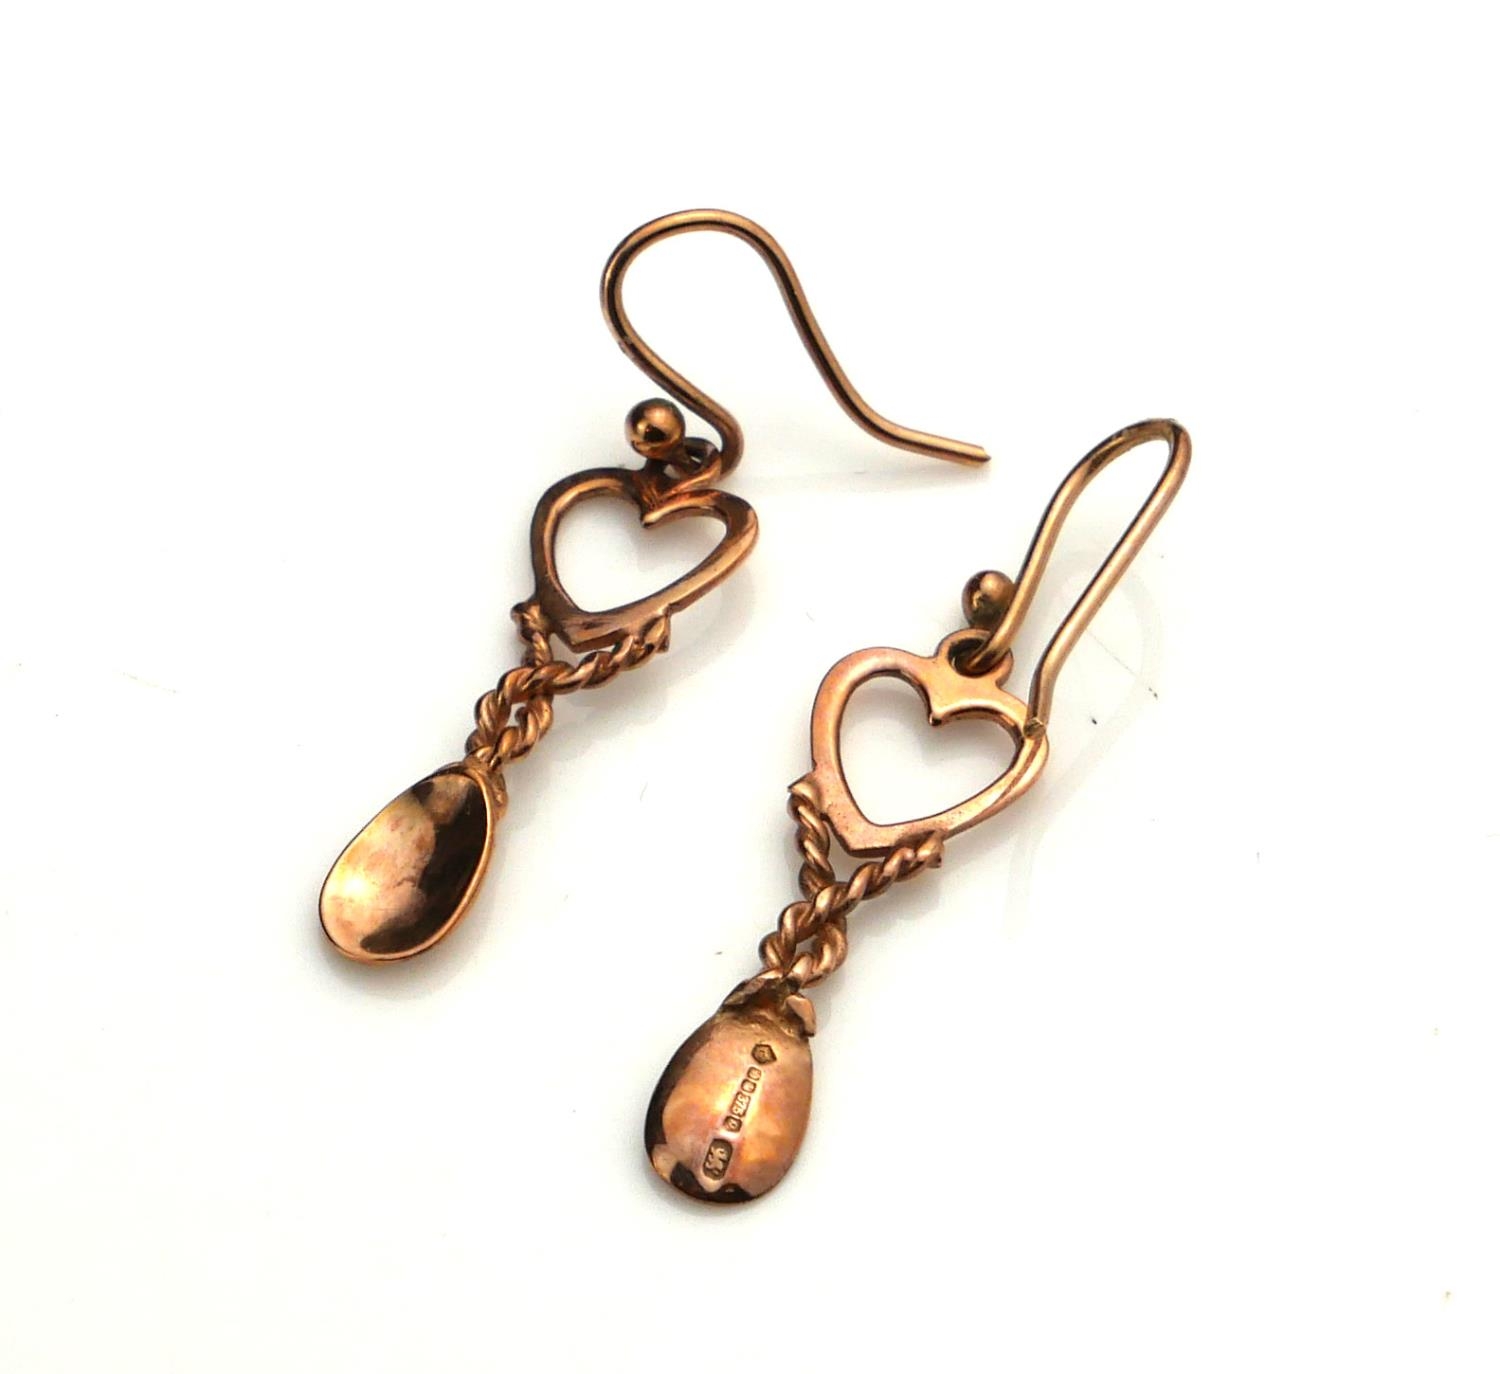 A PAIR OF MODERN 9CT ROSE GOLD EARRINGS FORMED AS WELSH LOVE SPOONS With heart form finials. (approx